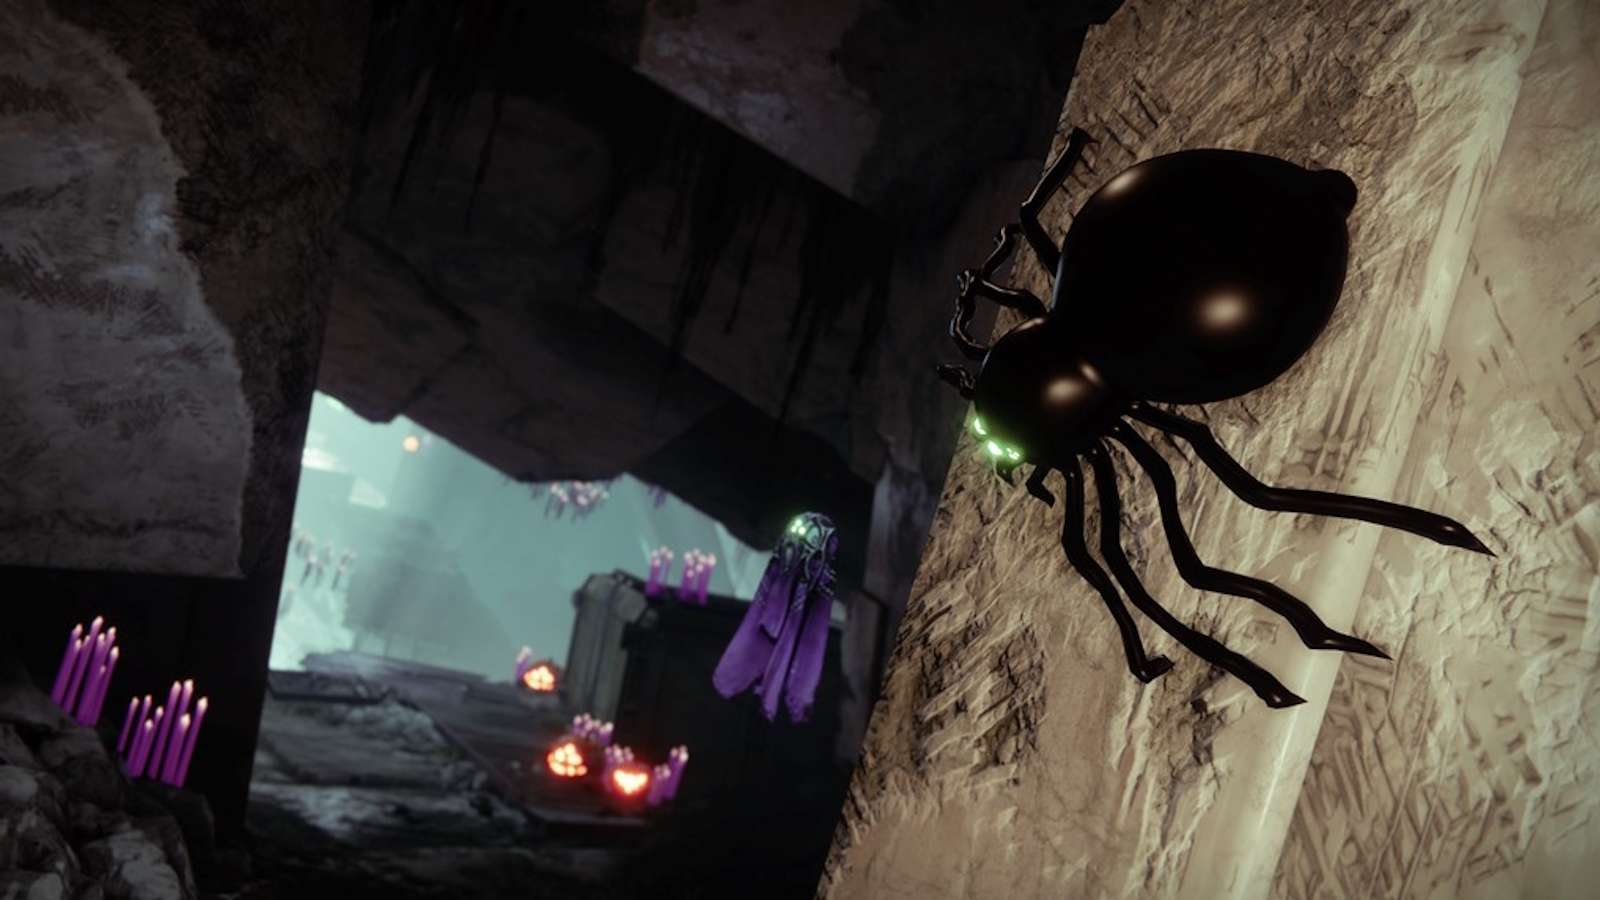 Destiny 2 Haunted Sector with spider on wall.